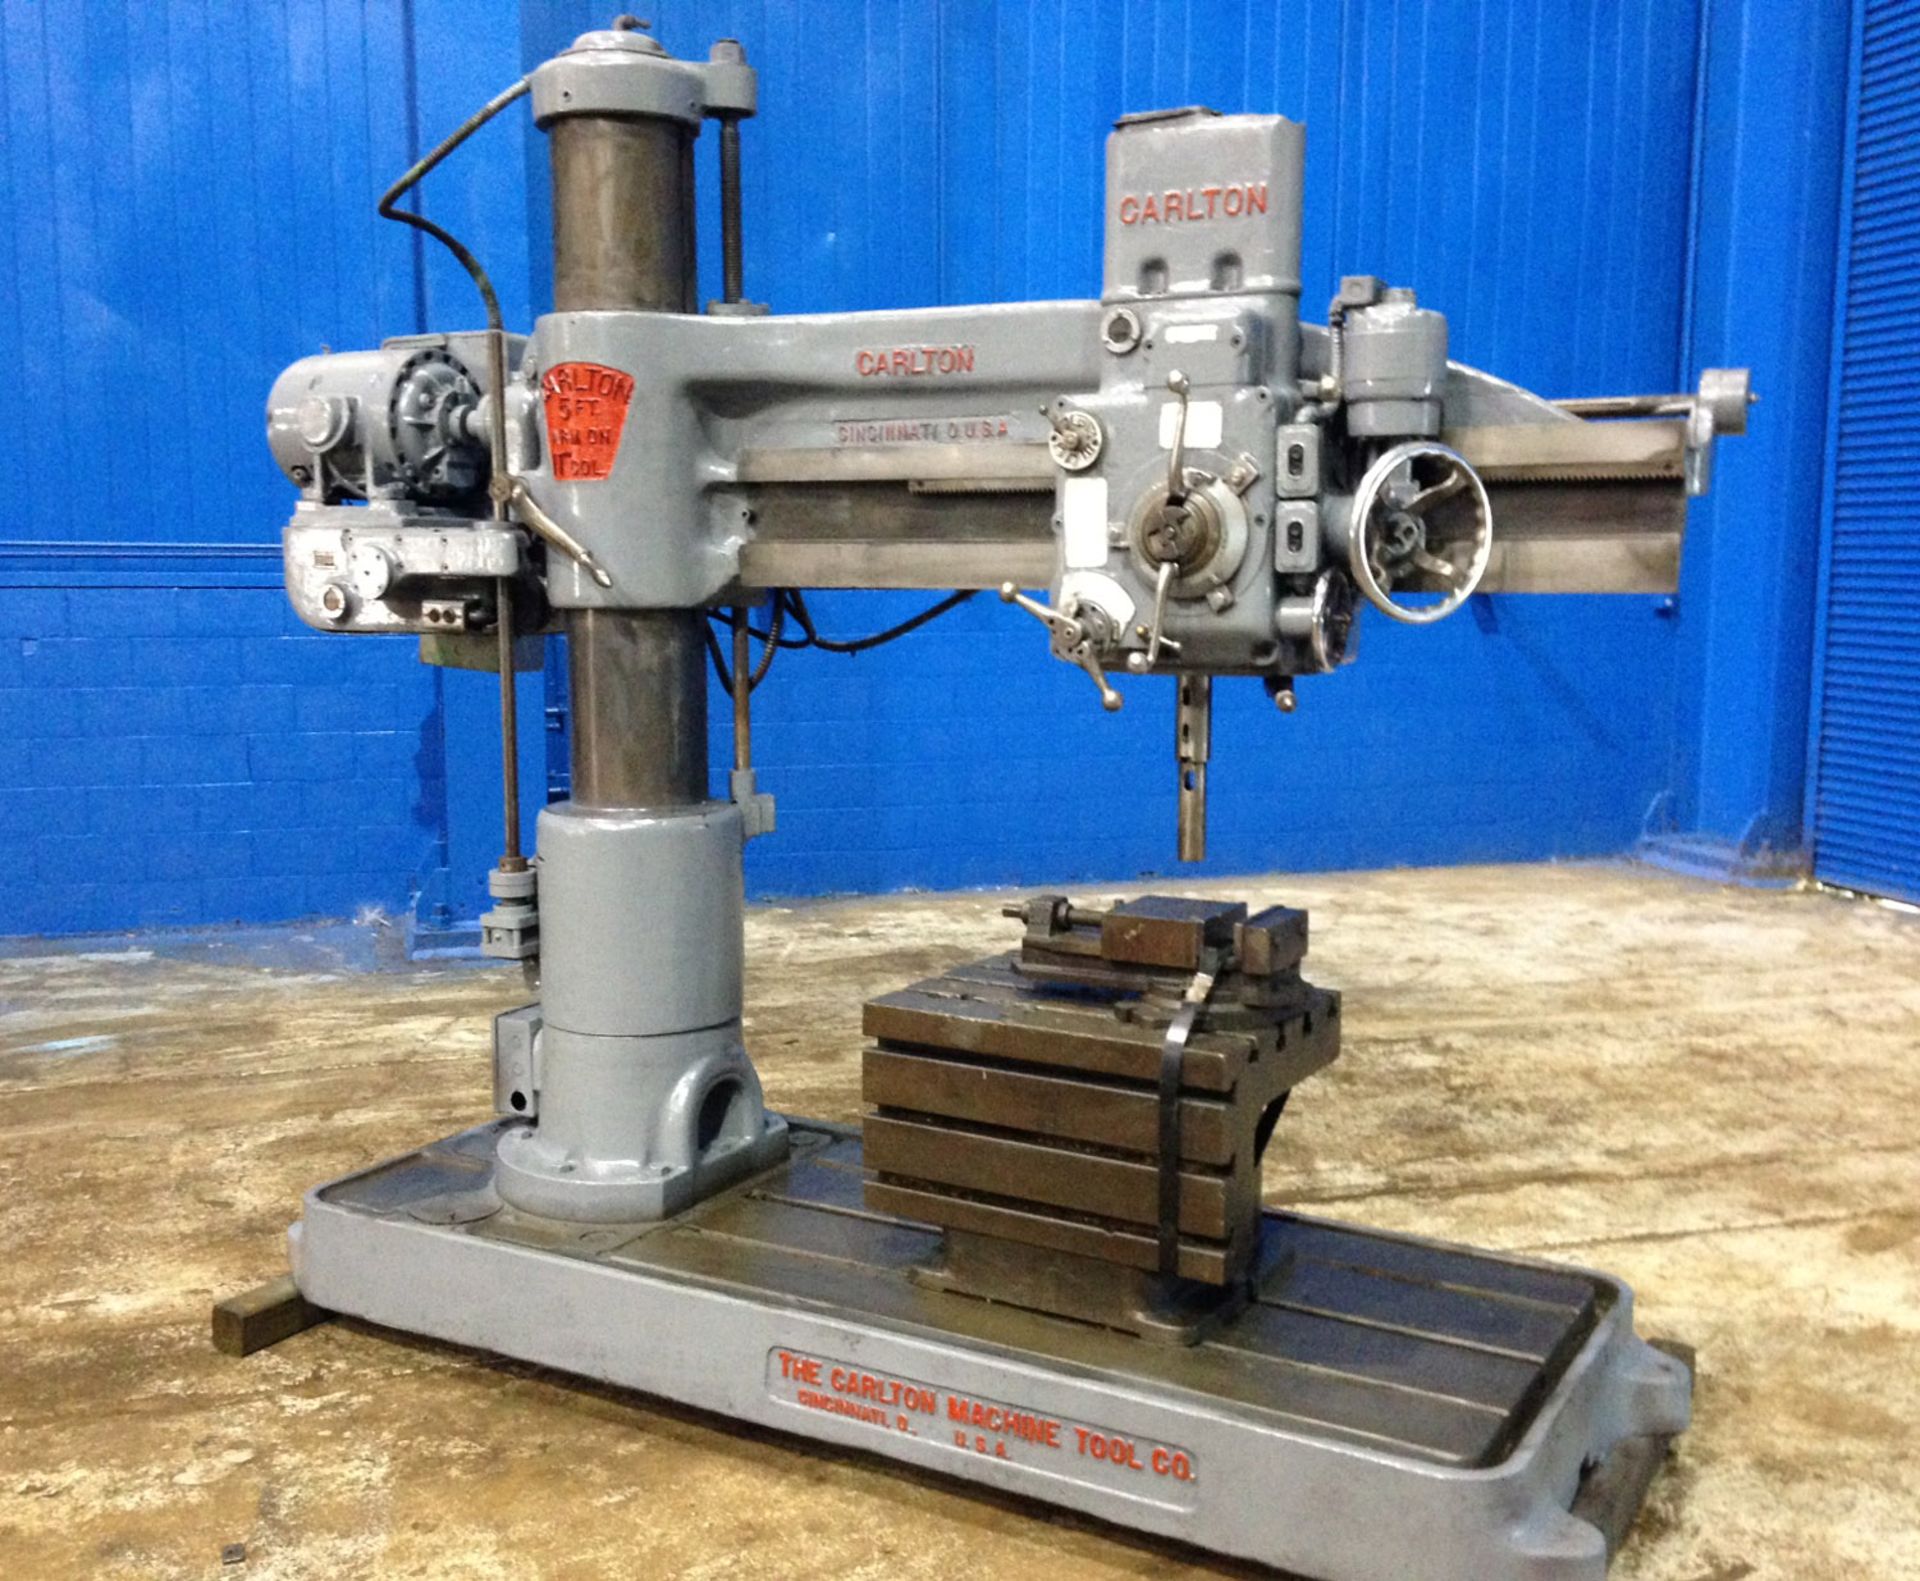 FREE LOADING - Located In: Painesville, OH - Carlton Radial Arm Drill, 5' x 11", Mdl: 1A, S/N: 1254 - Image 2 of 6